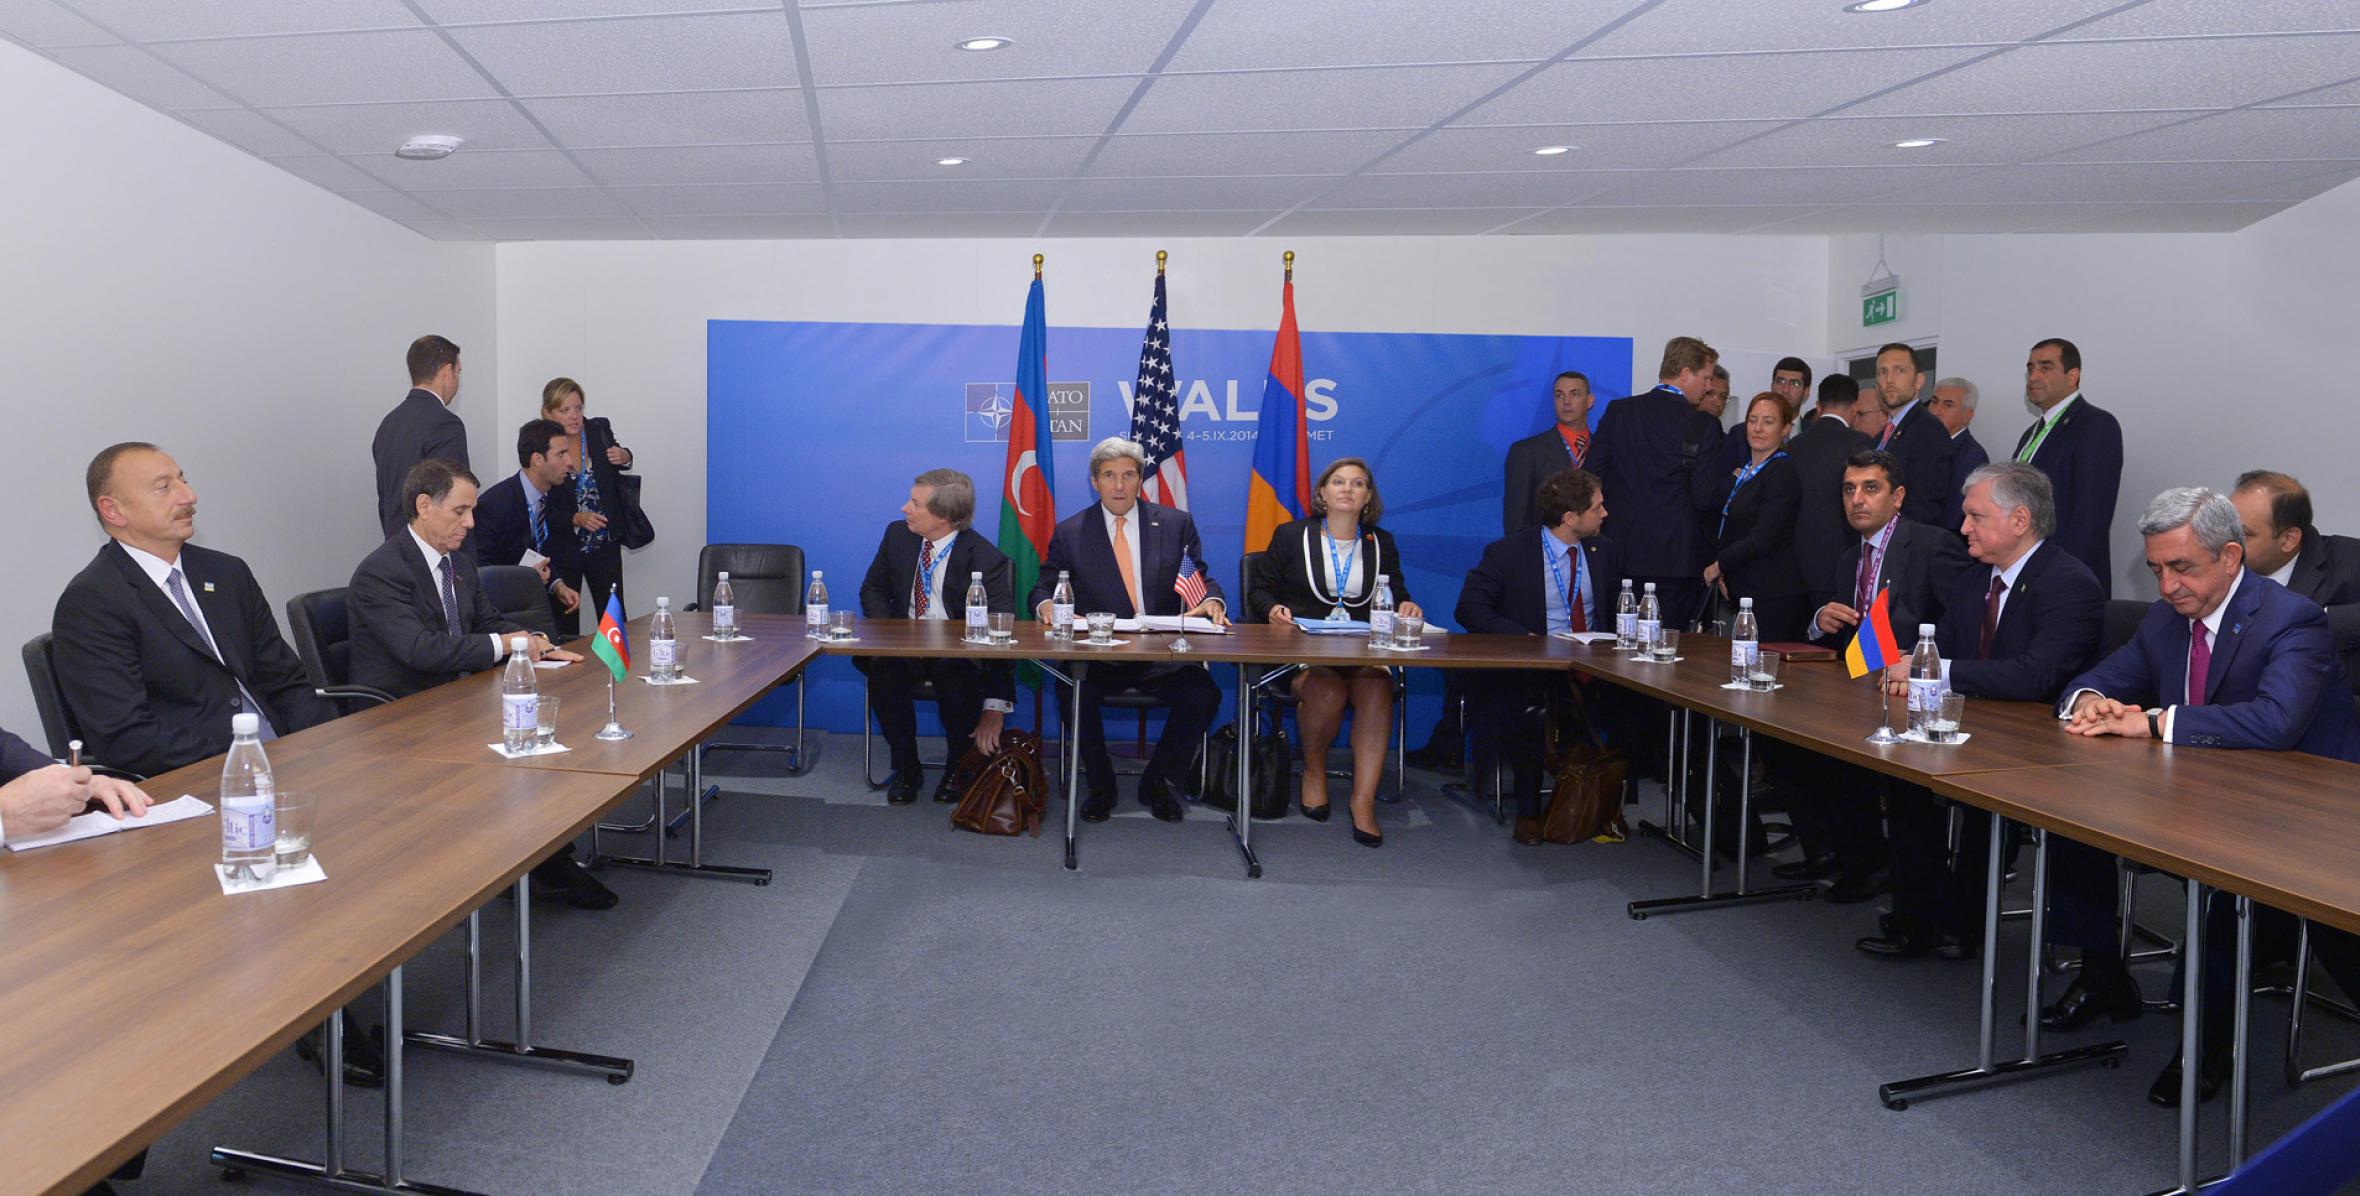 A joint meeting of the Presidents of Azerbaijan, Armenia and the US Secretary of State was held in Wales